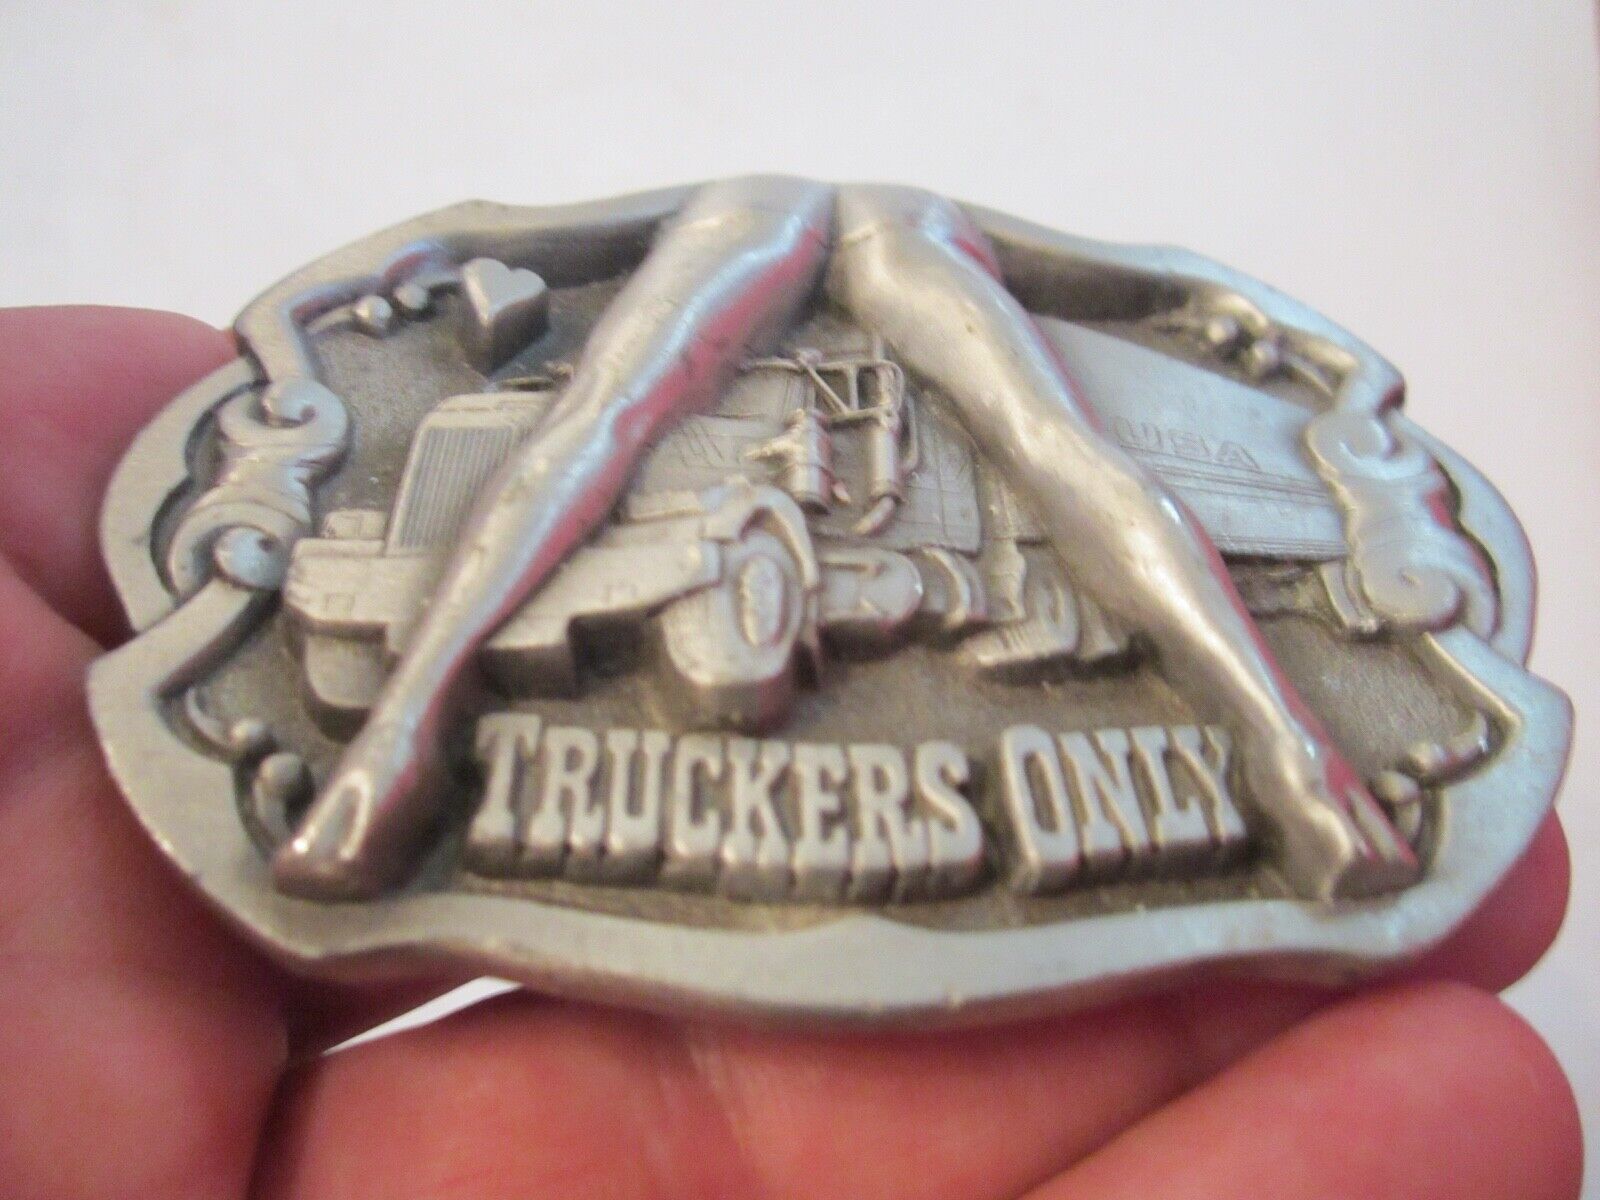 1992 TRUCKERS ONLY BELT BUCKLE - DRAGON COLLECTION - ENGLAND - GW-10